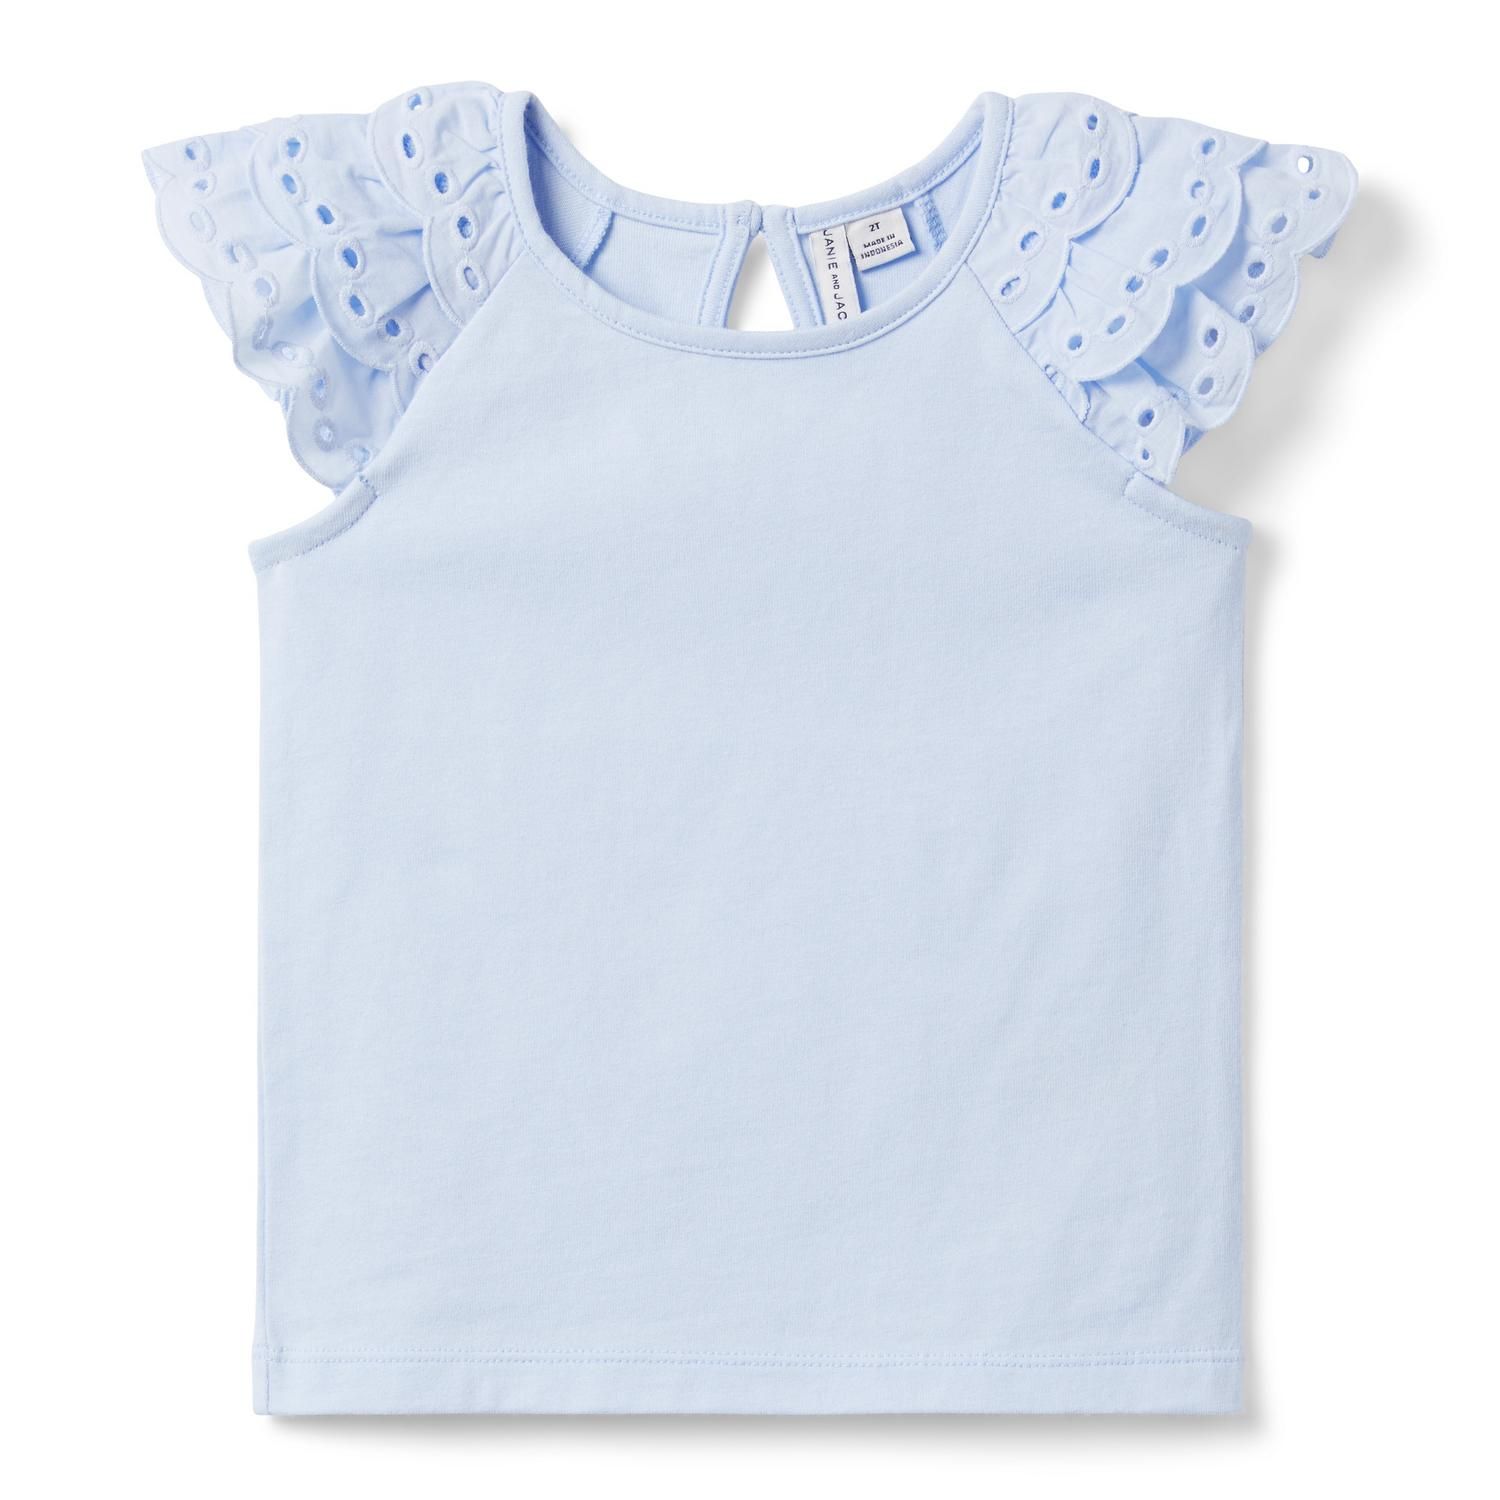 Eyelet Sleeve Jersey Top | Janie and Jack